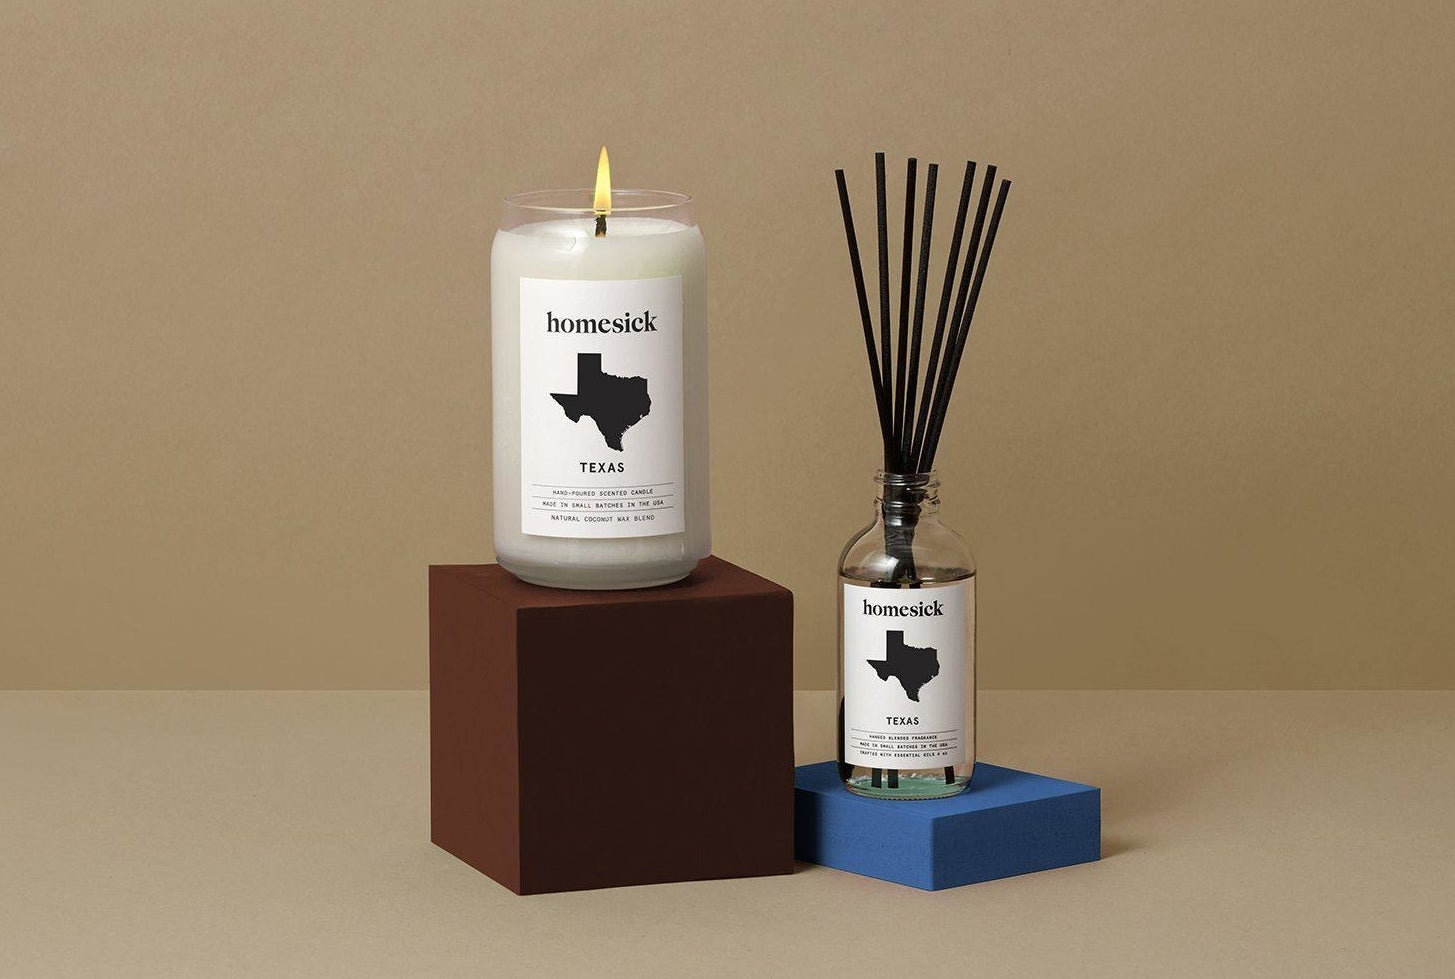 The candle and diffuser in Texas scent. The labels show the name and shape of the state 